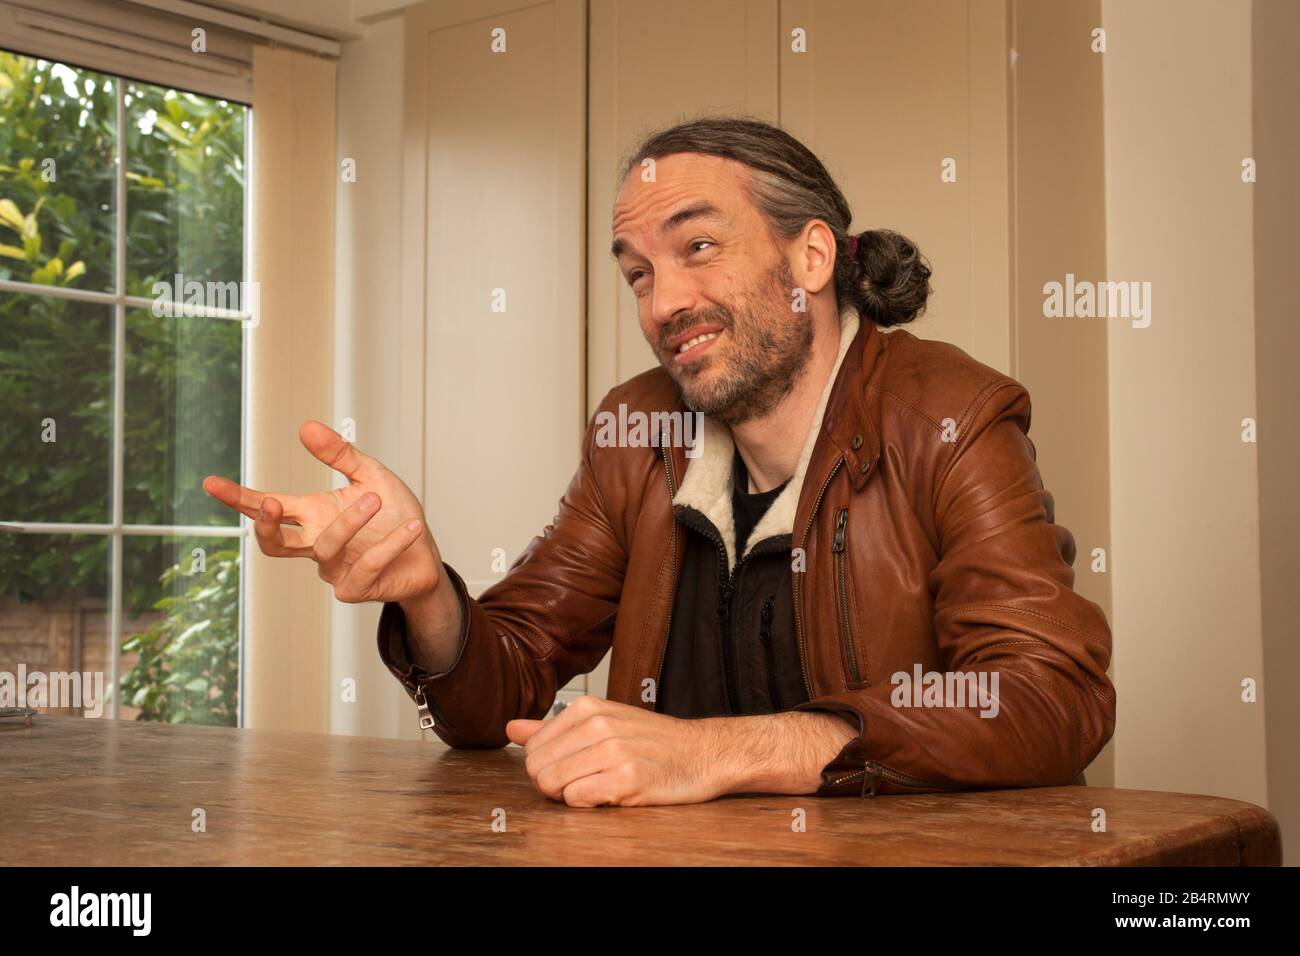 A man with a ponytail and a beard in conversation with someone Stock Photo